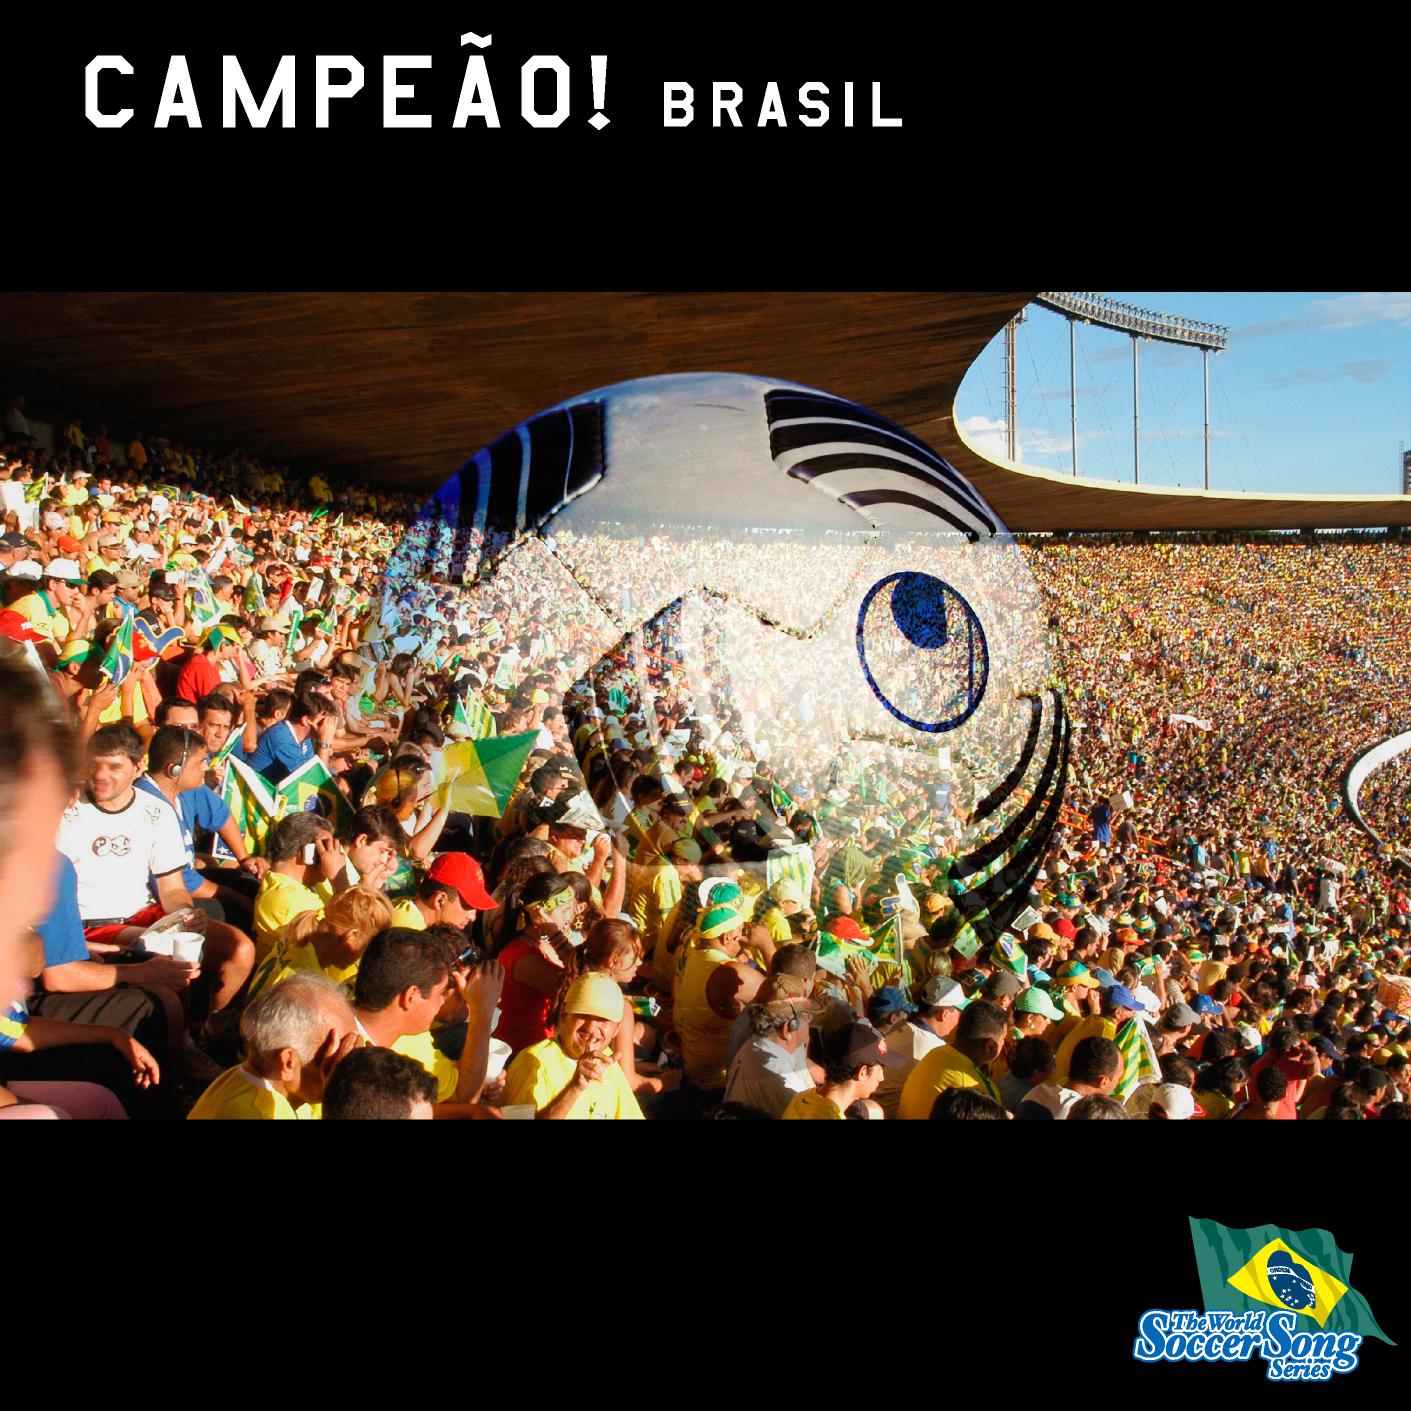 THE WORLD SOCCER SONG SERIES Vol.1 "CAMPEaO!BRASIL"